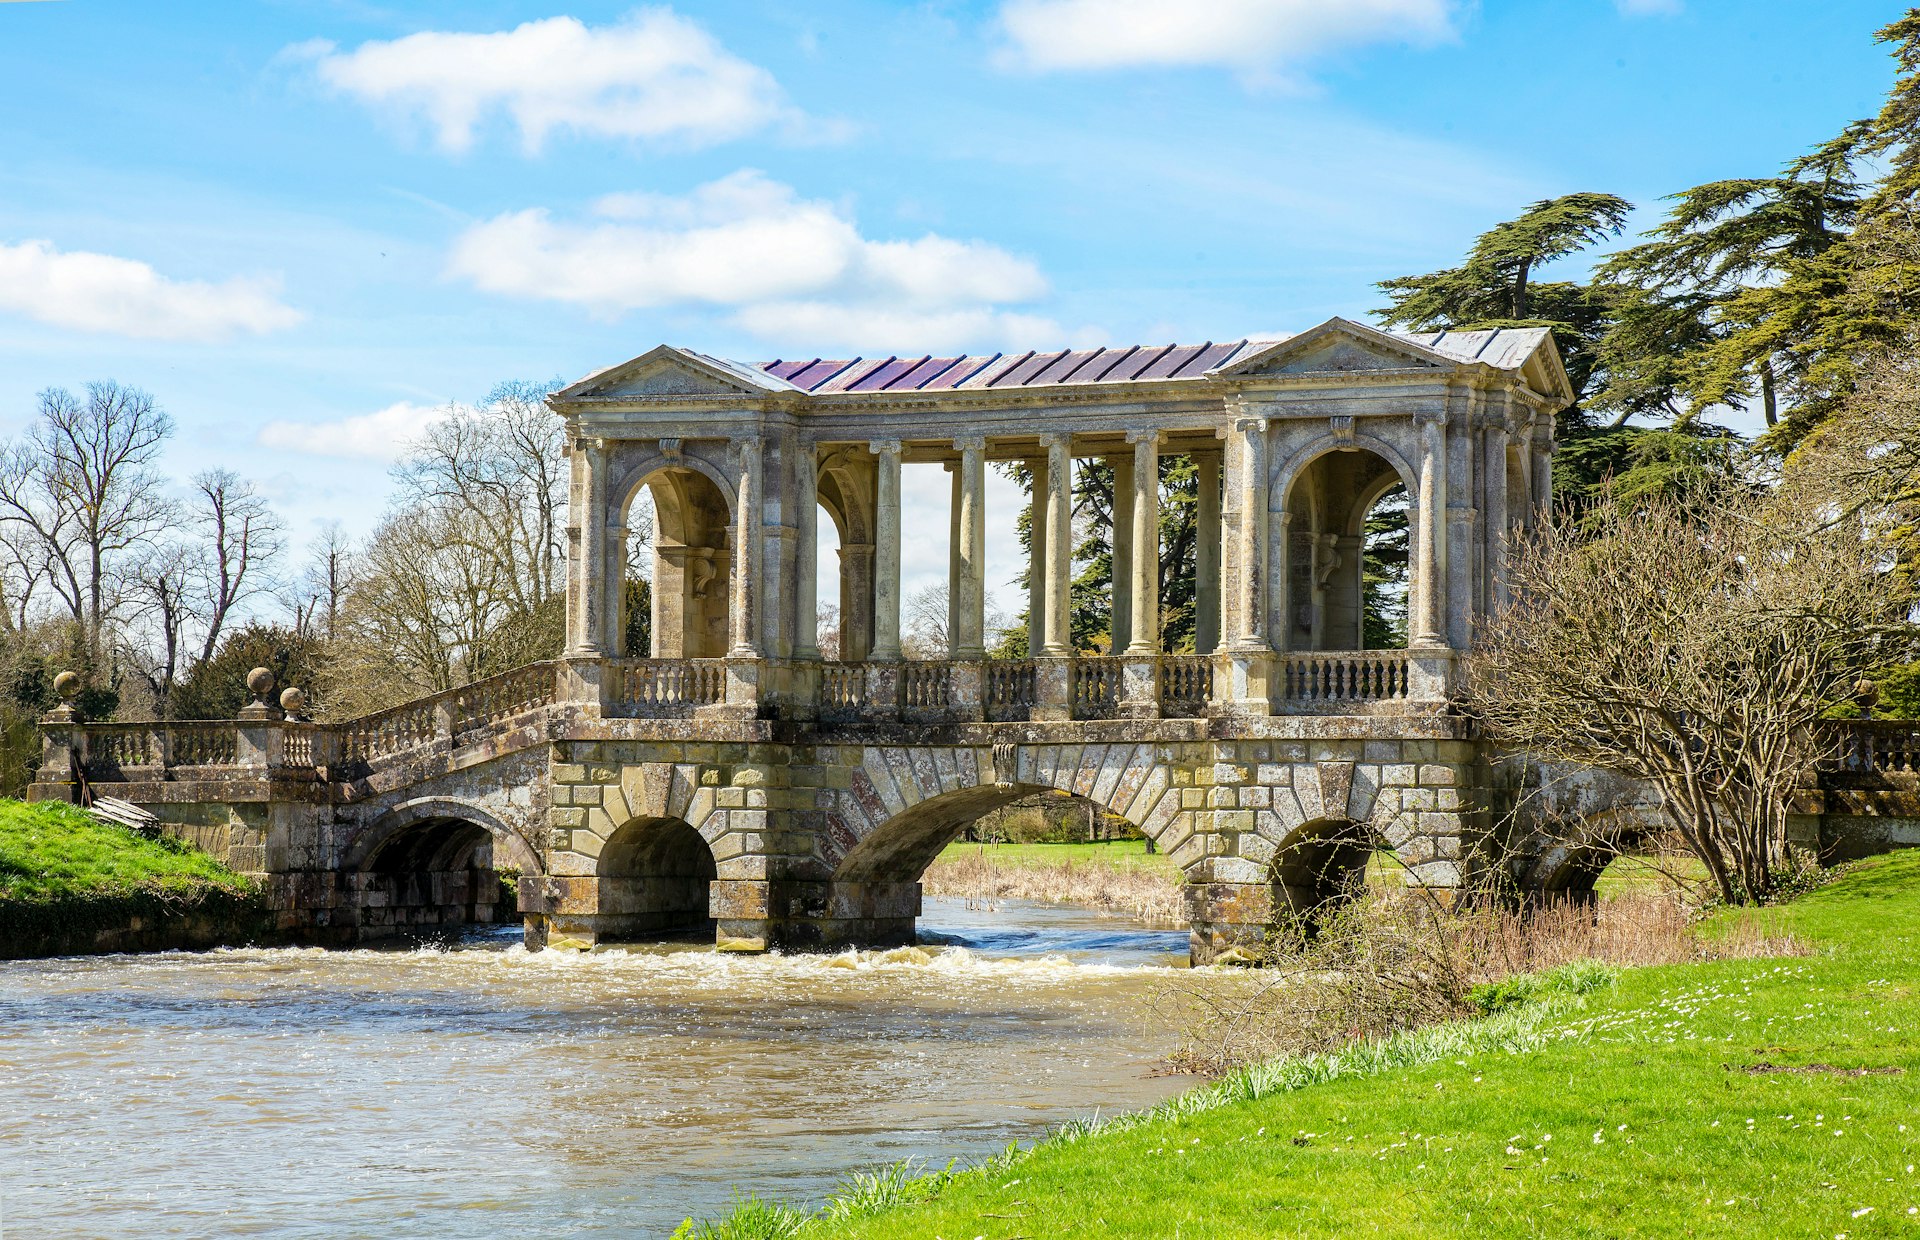 A stream flows beneath the Palladian Bridge at Wilton House. Trees without their leaves are visible in the background.